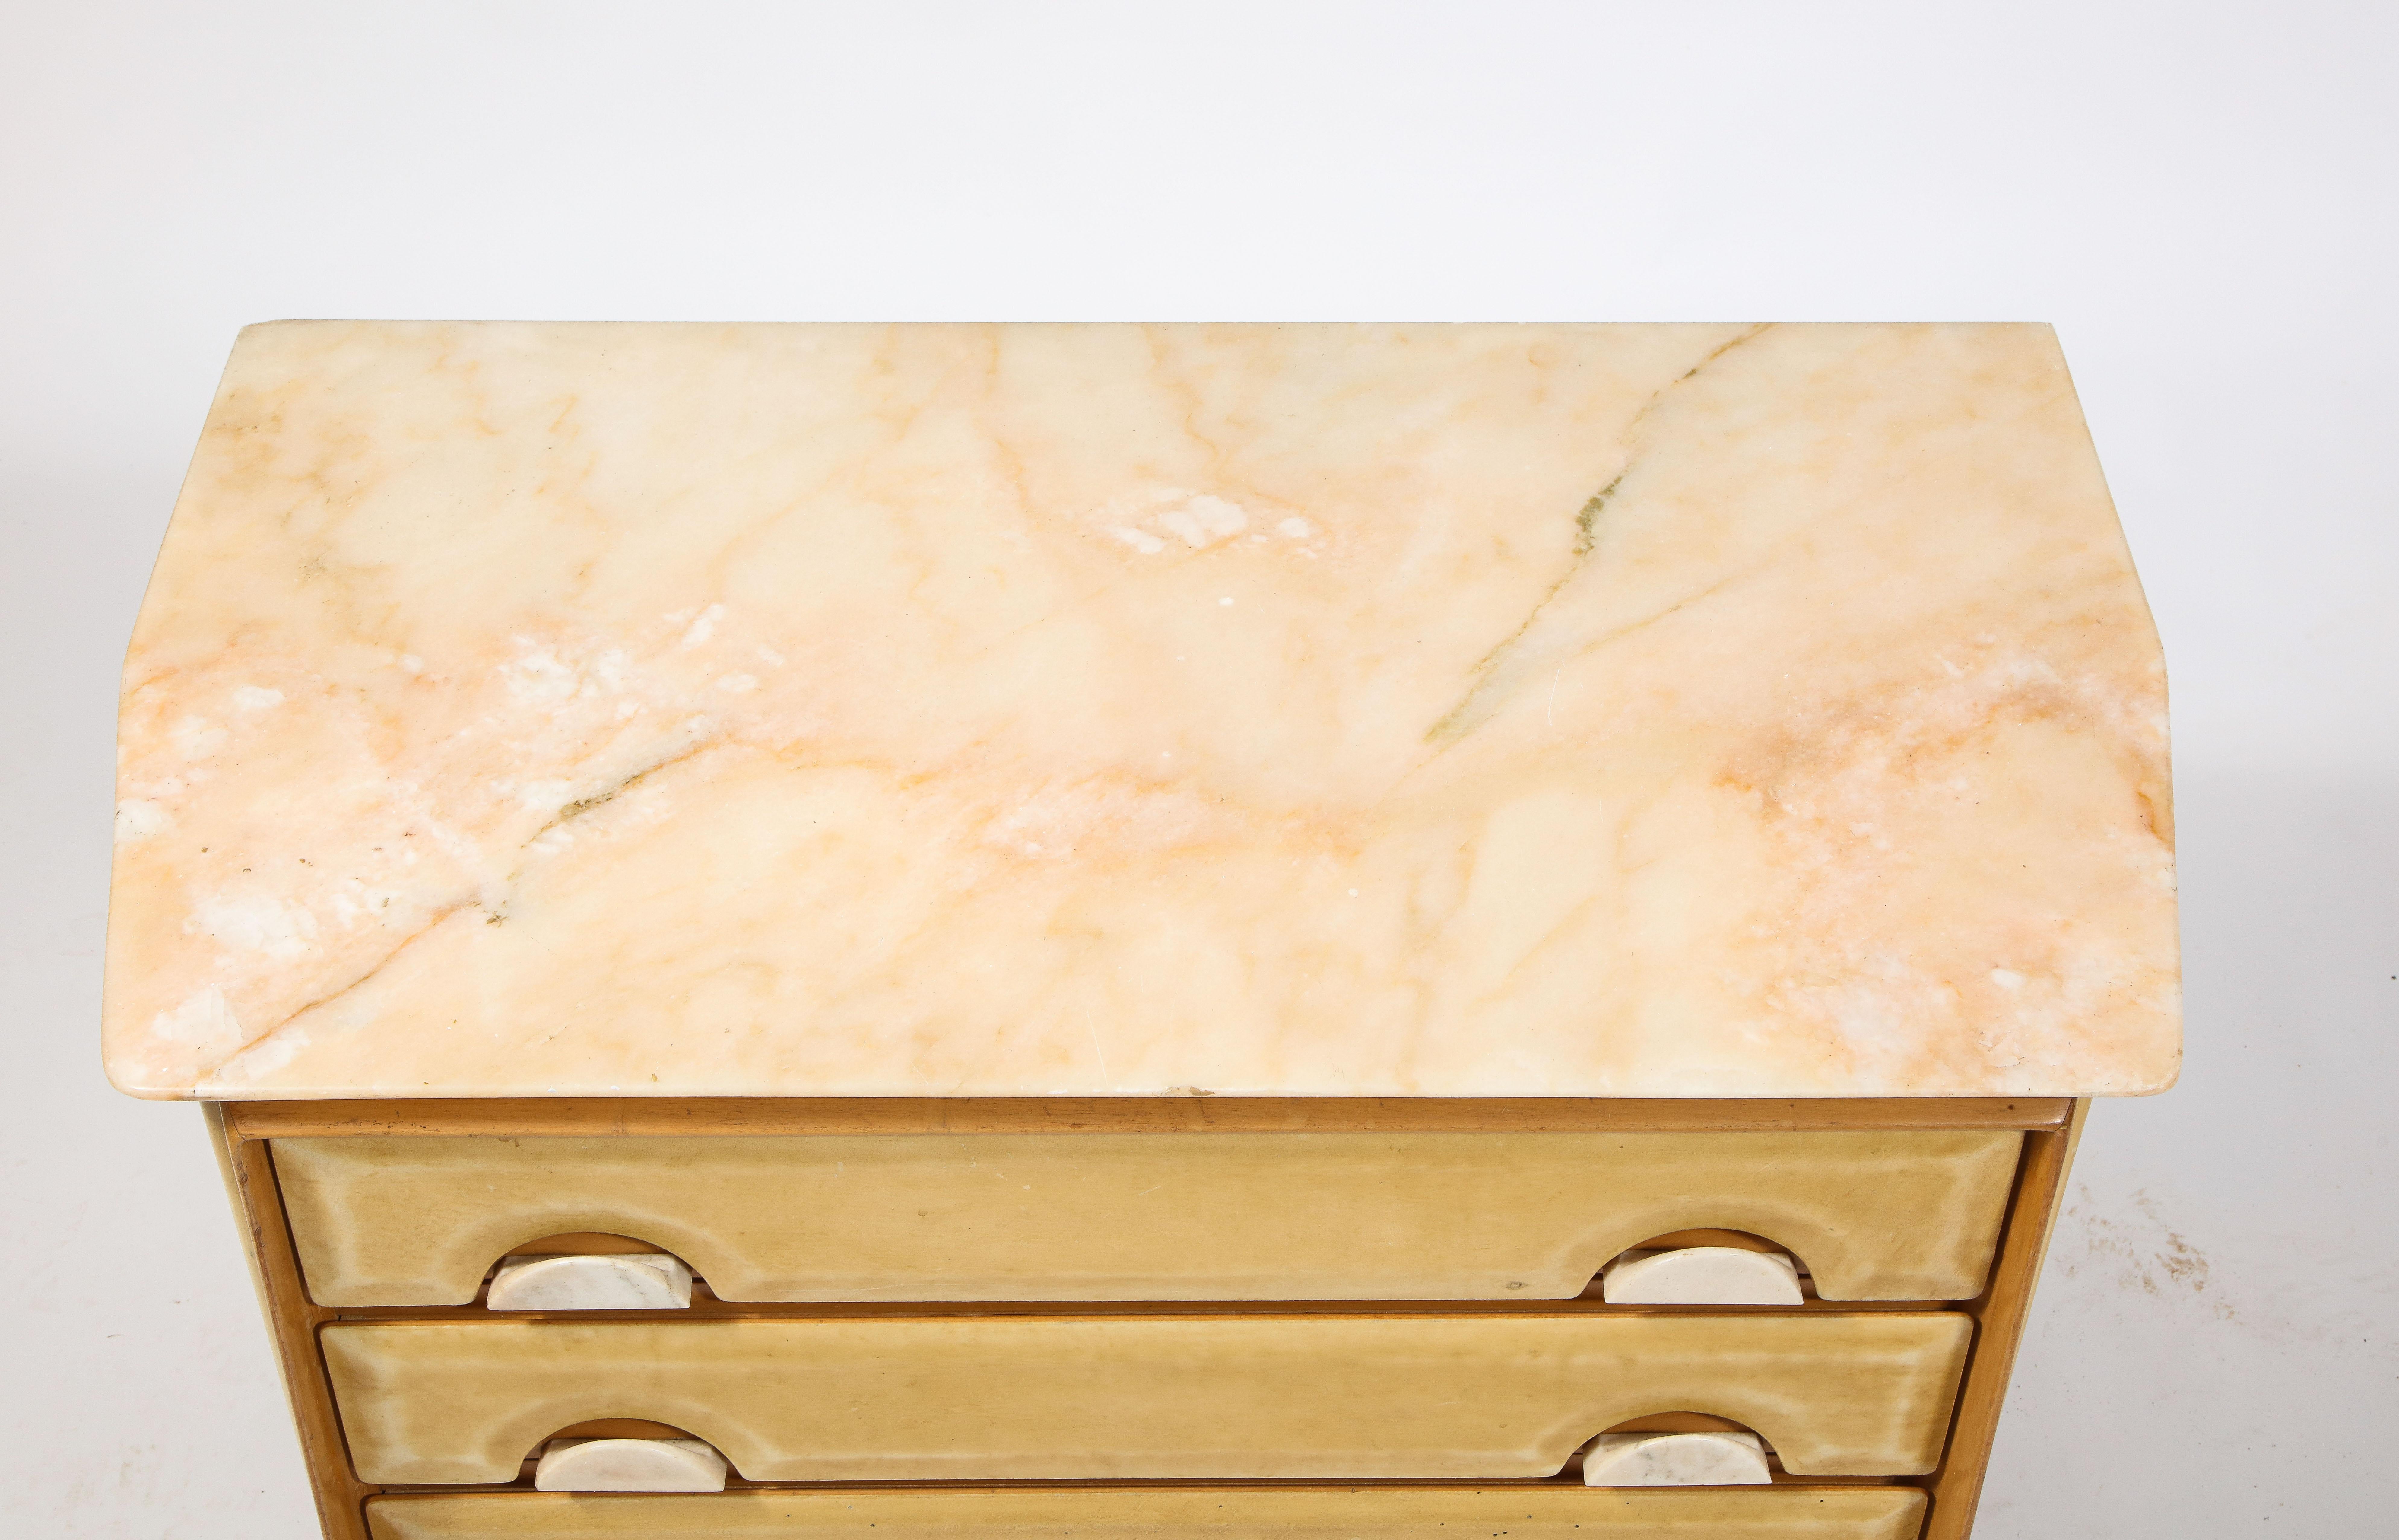 Beech commode covered in parchment, each face has a subtly different angle. The top is a pink-hued marble also used for handles.